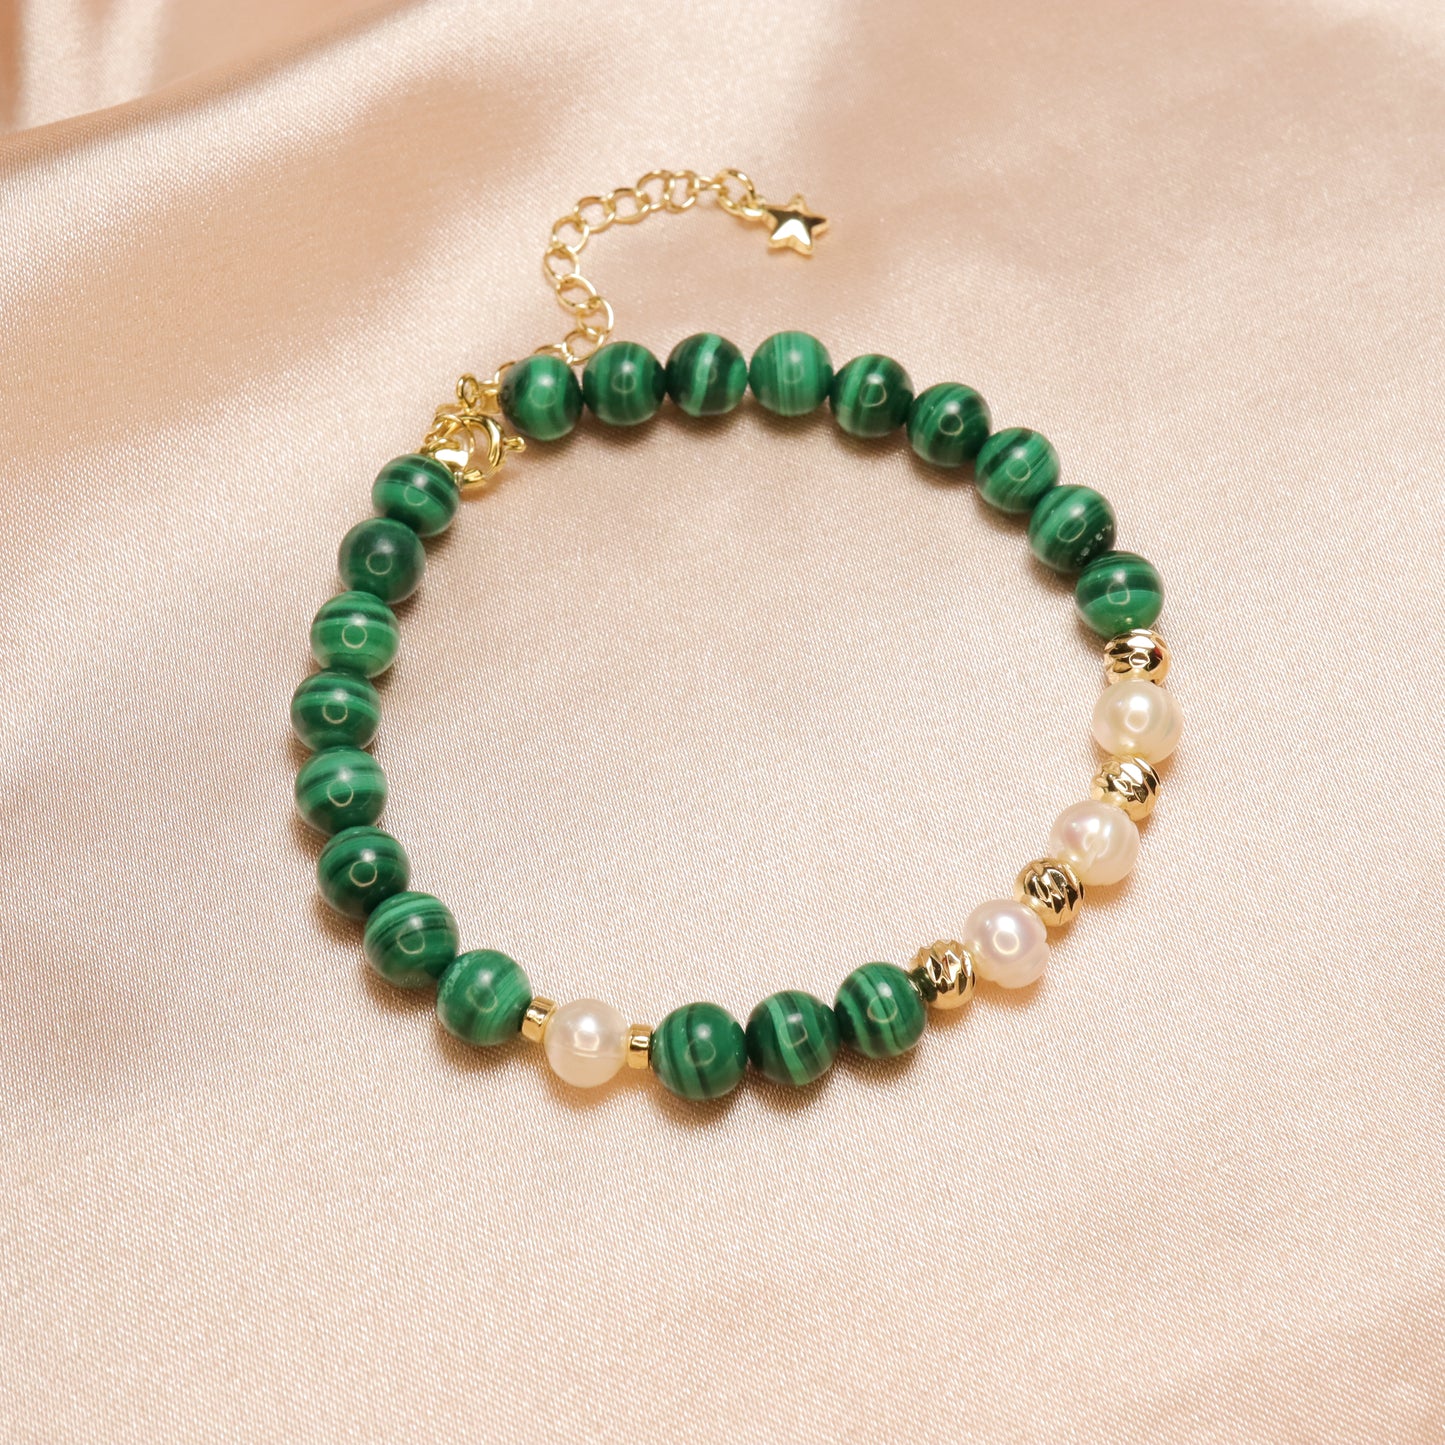 Peacock Pride -  Malachite & Freshwater Pearl Bracelet with Adjustable Chain